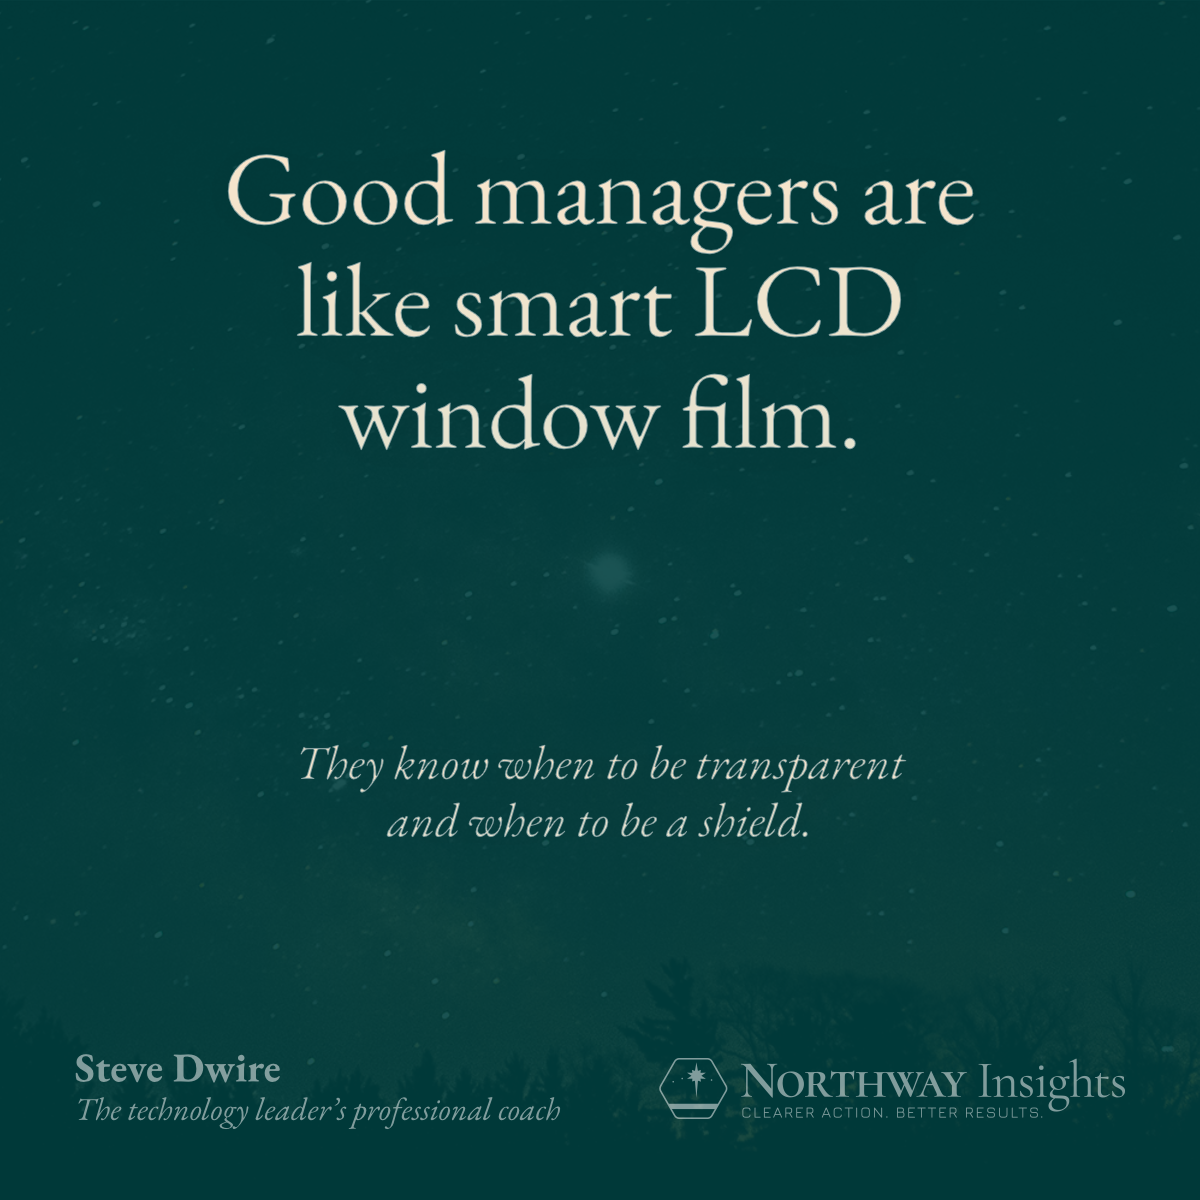 Good managers are like smart LCD window film. (They know when to be transparent and when to be a shield.)